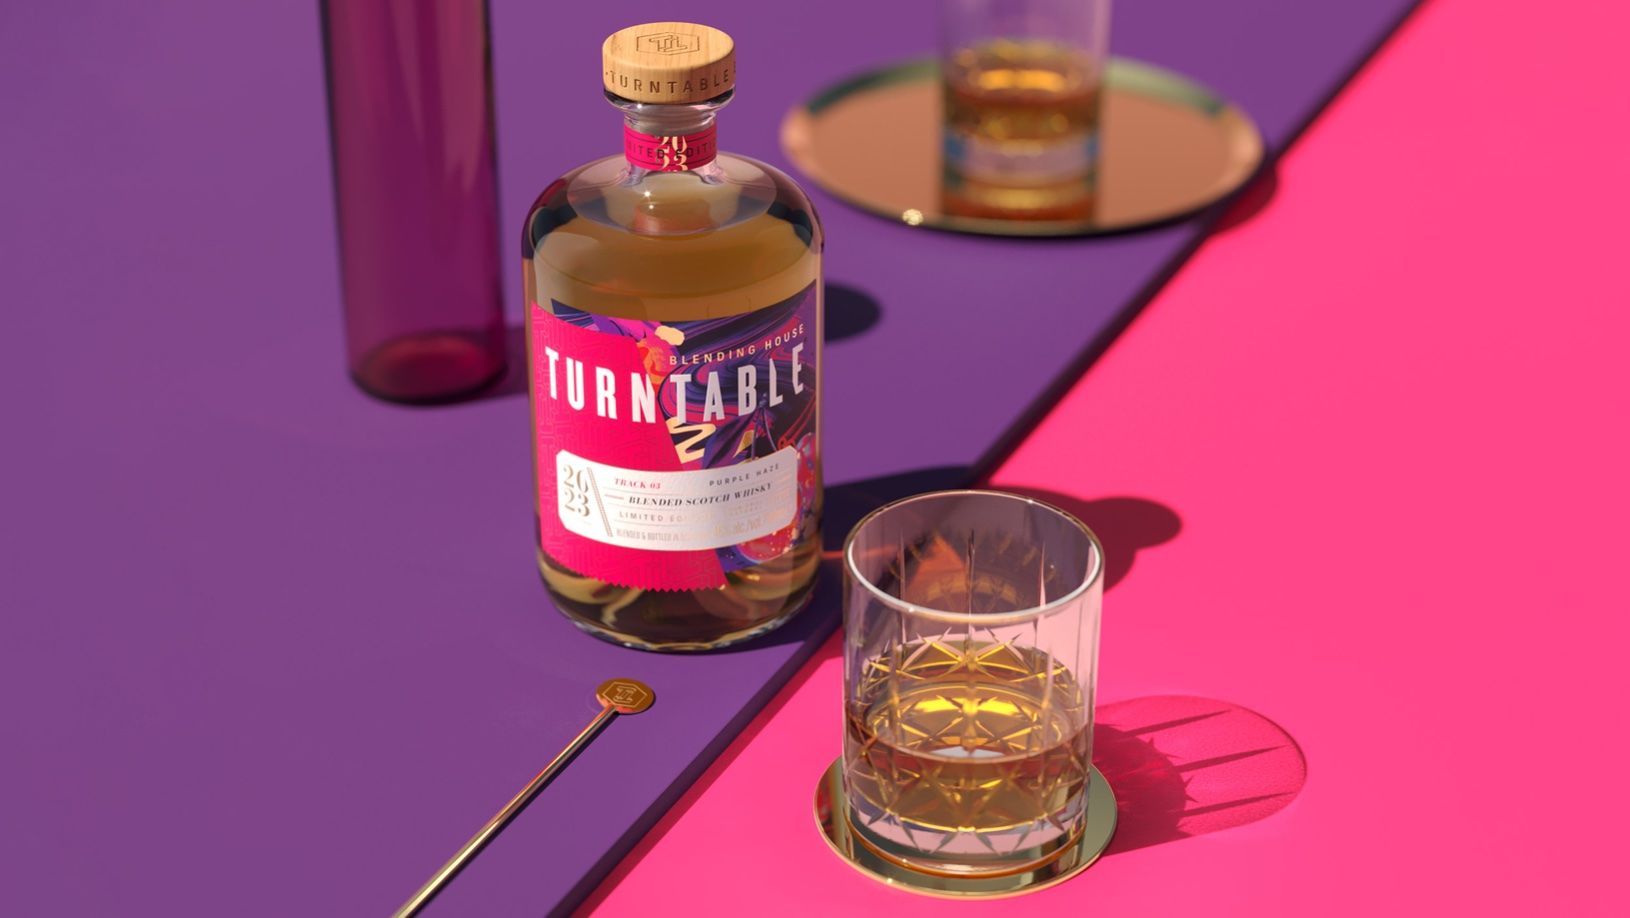 Creative Agency Thirst Strikes A Musical Chord To Help New Whisky Brand Turntable